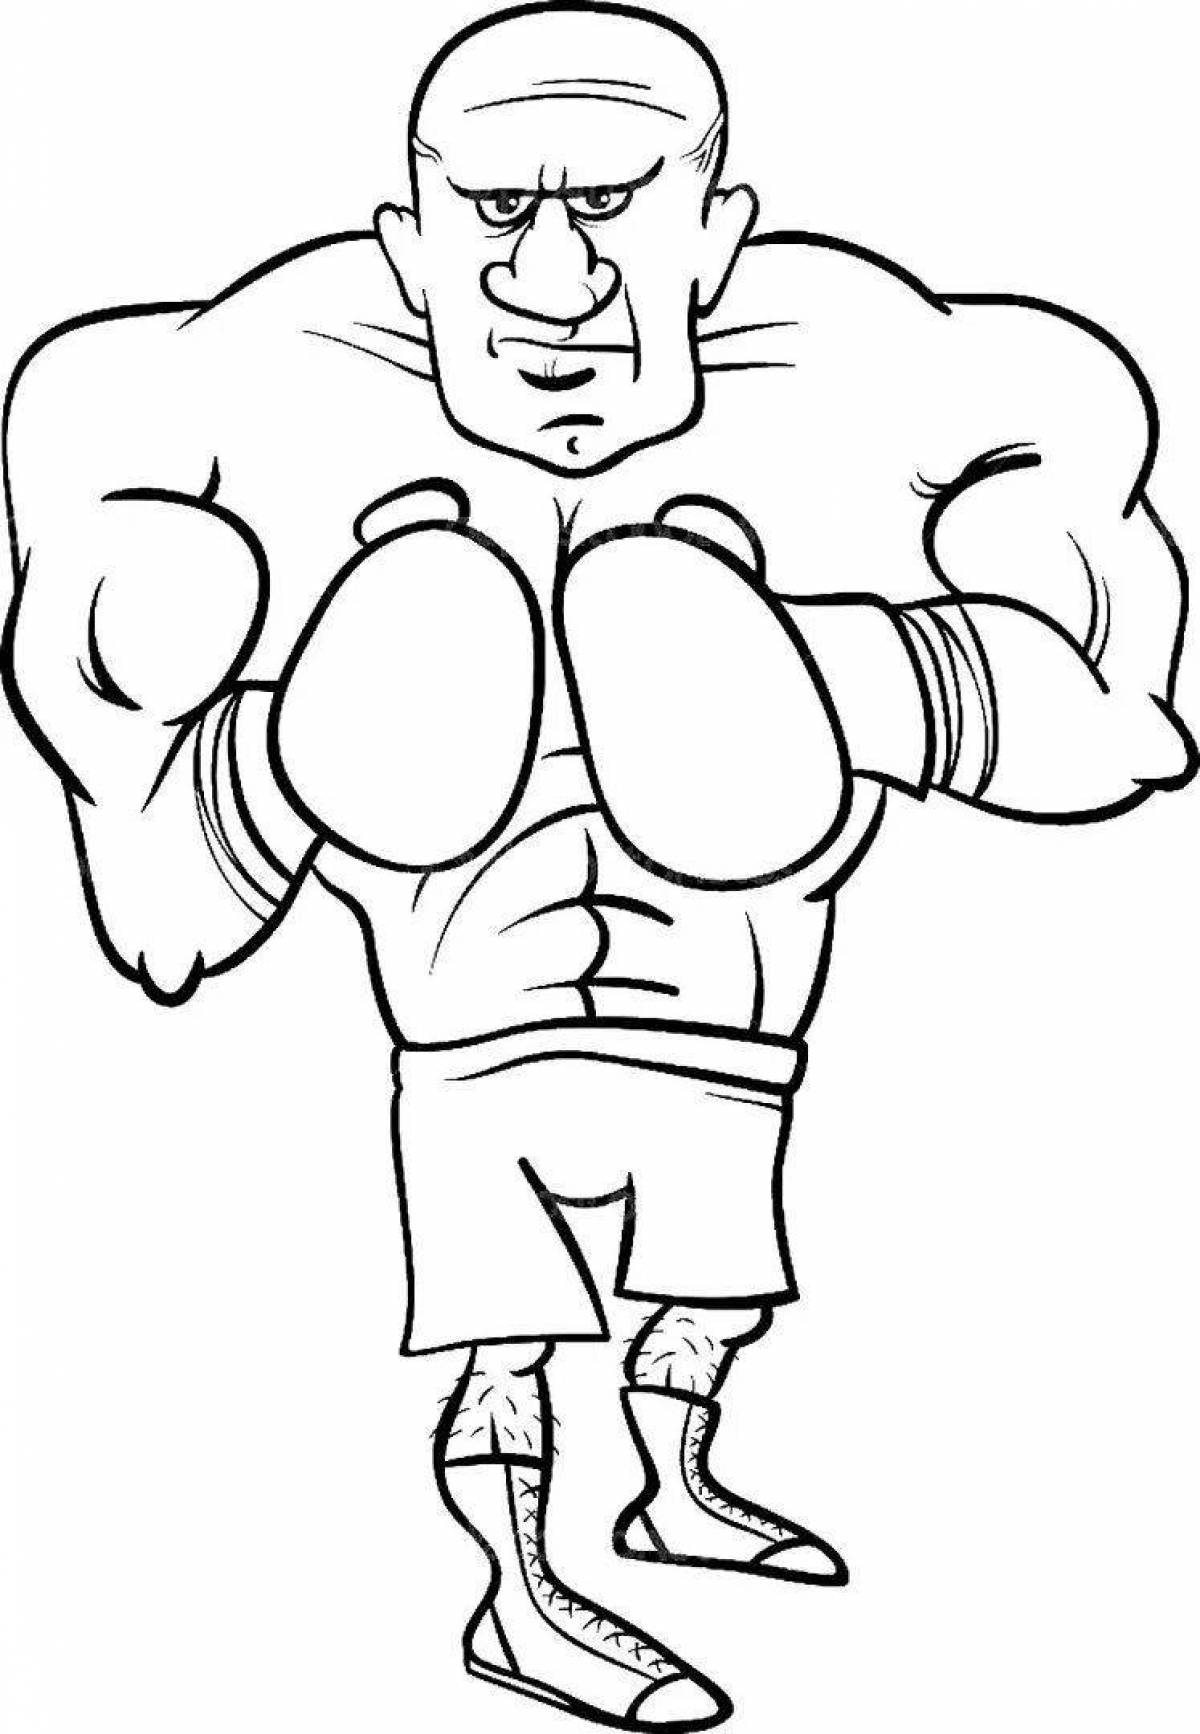 Inspirational boxing coloring book for kids